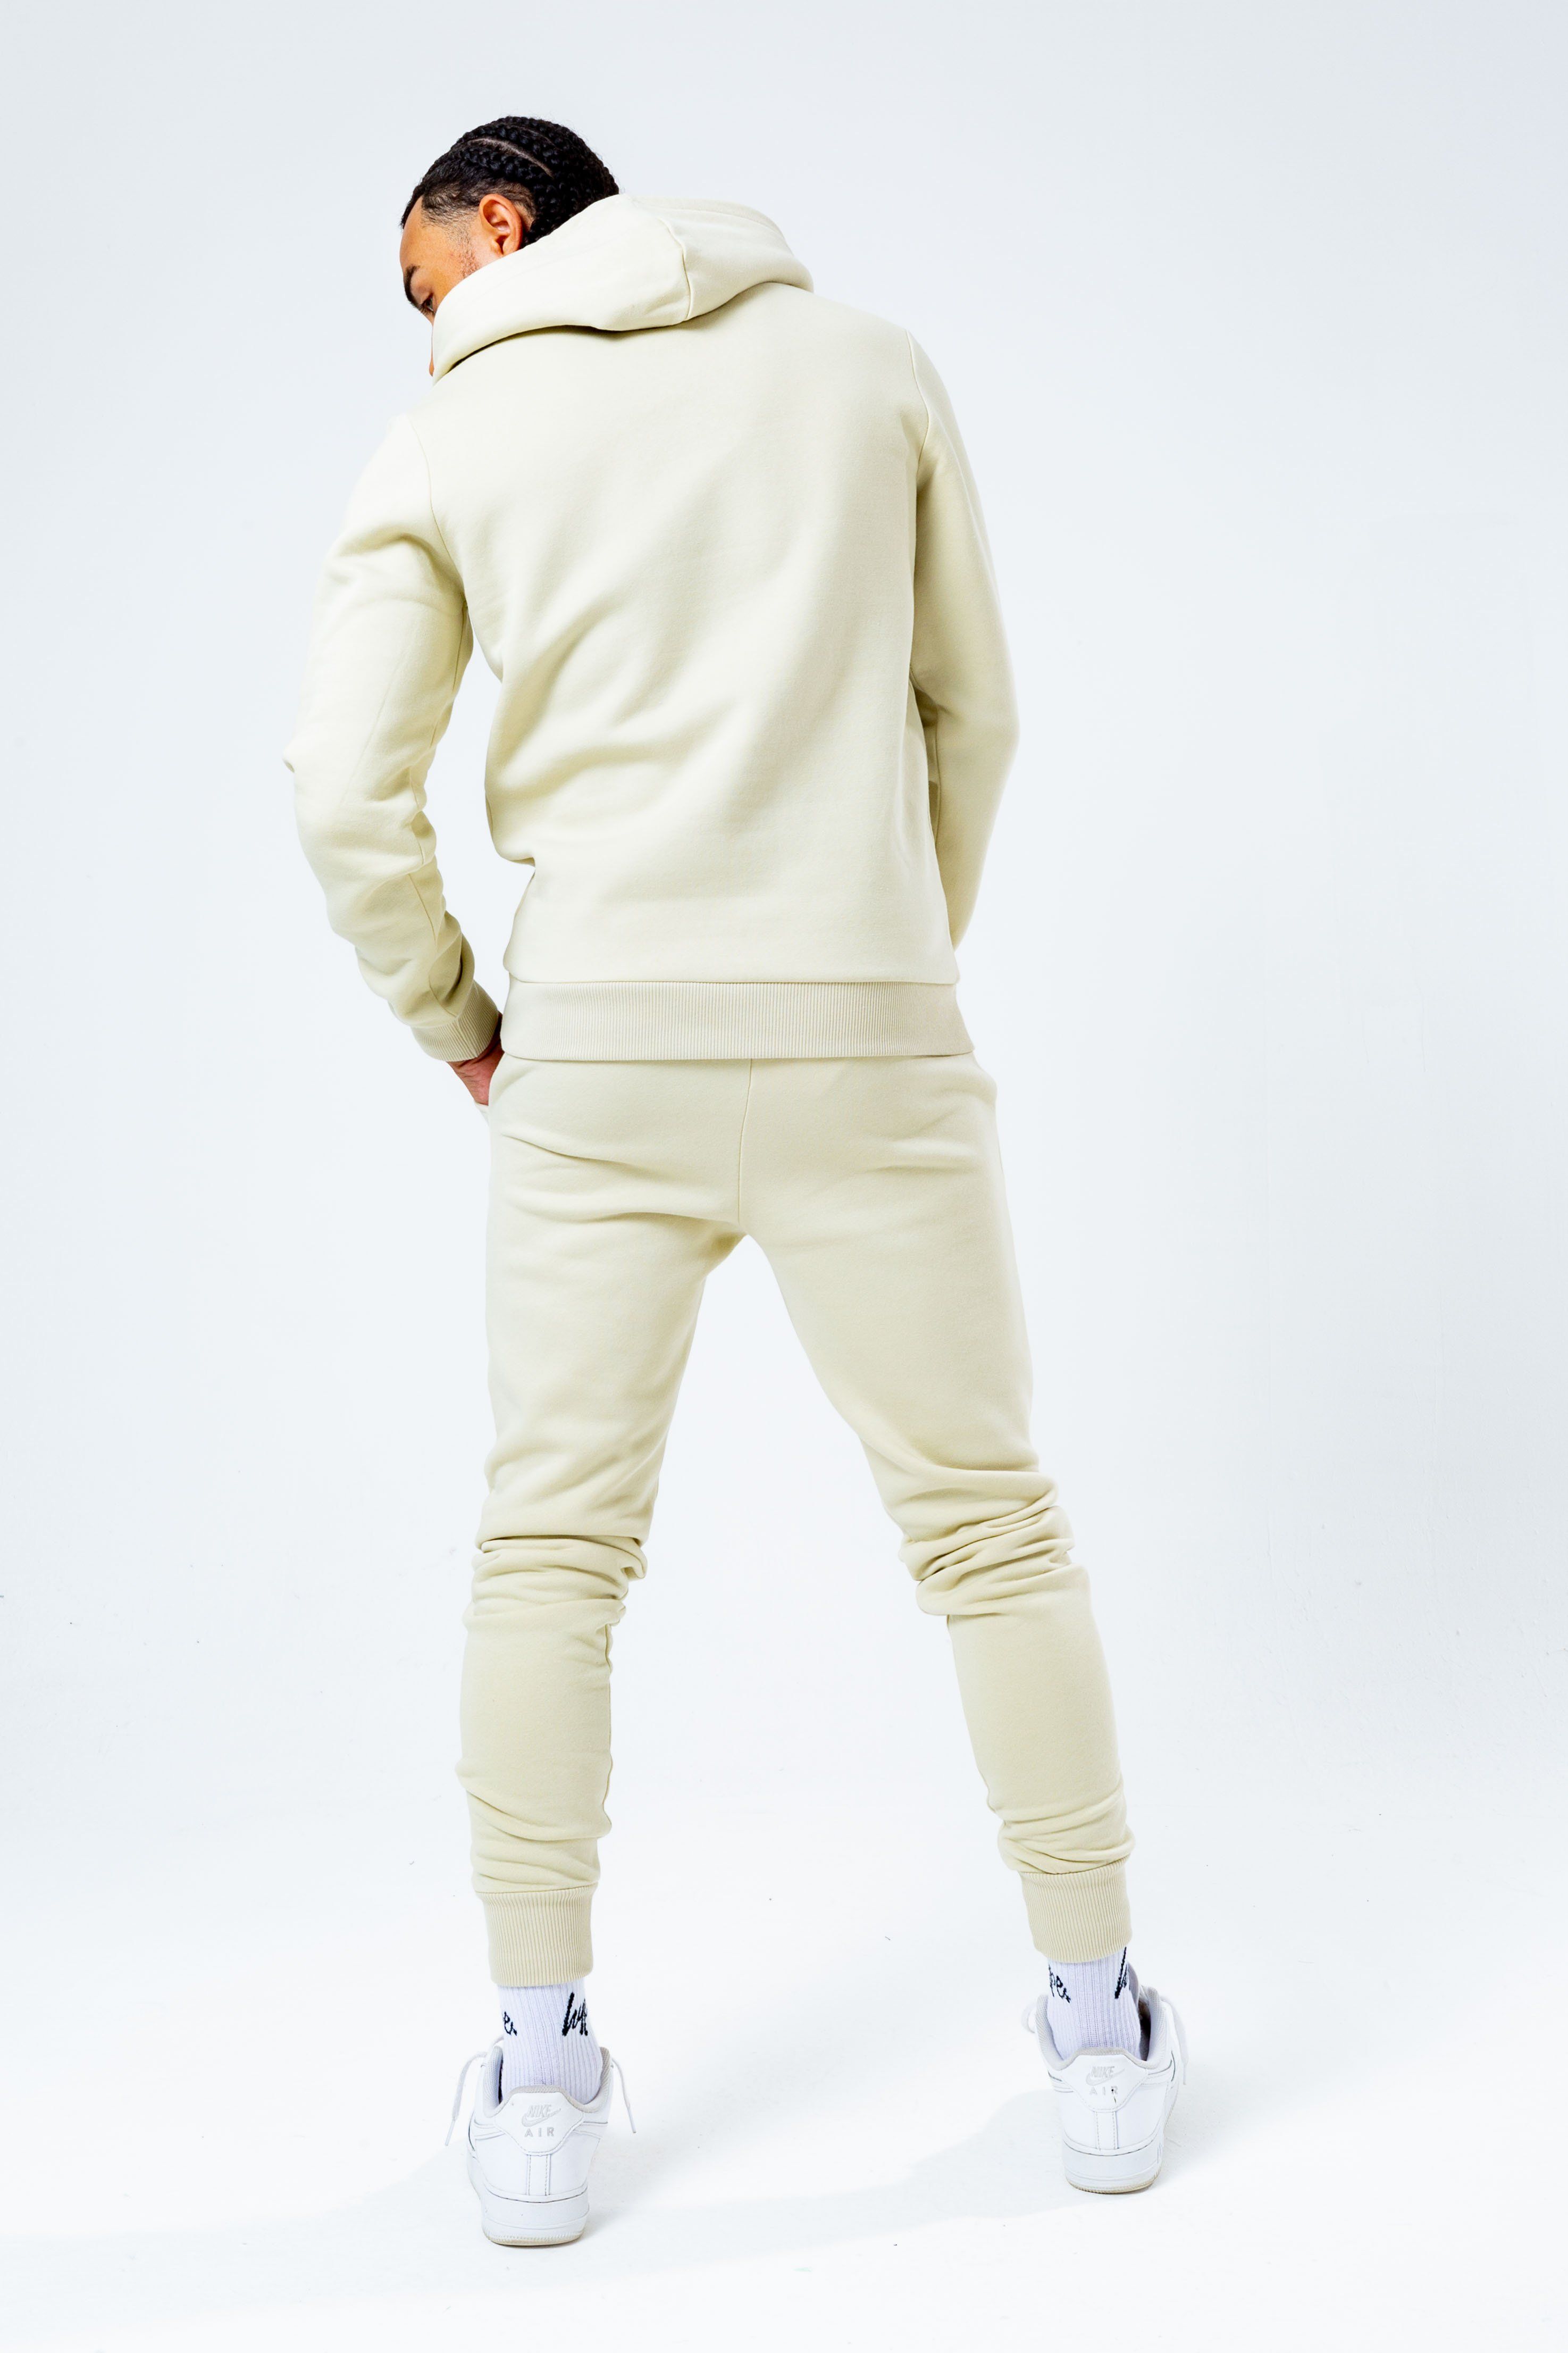 Introducing the freshest loungewear set you've ever seen! The Hype Off White Scribble Logo Men'S Hoodie & Jogger Set is your new go-to loungewear set when you need that extra comfort boost. Designed in 80% Cotton 20% Polyester for the ultimate soft touch feeling! The Hoodie features a fixed hood, kangaroo pocket, fitted hem and cuffs, finished with drawstring pullers and embossed justhype embroidery across the front in the same colour. The Joggers highlight an elasticated waistband, fitted cuffs and double pockets with tonal drawstring pullers and embossed justhype embroidery on the side of the leg. Wear together or stand alone with a pair of box fresh kicks. Machine washable.�